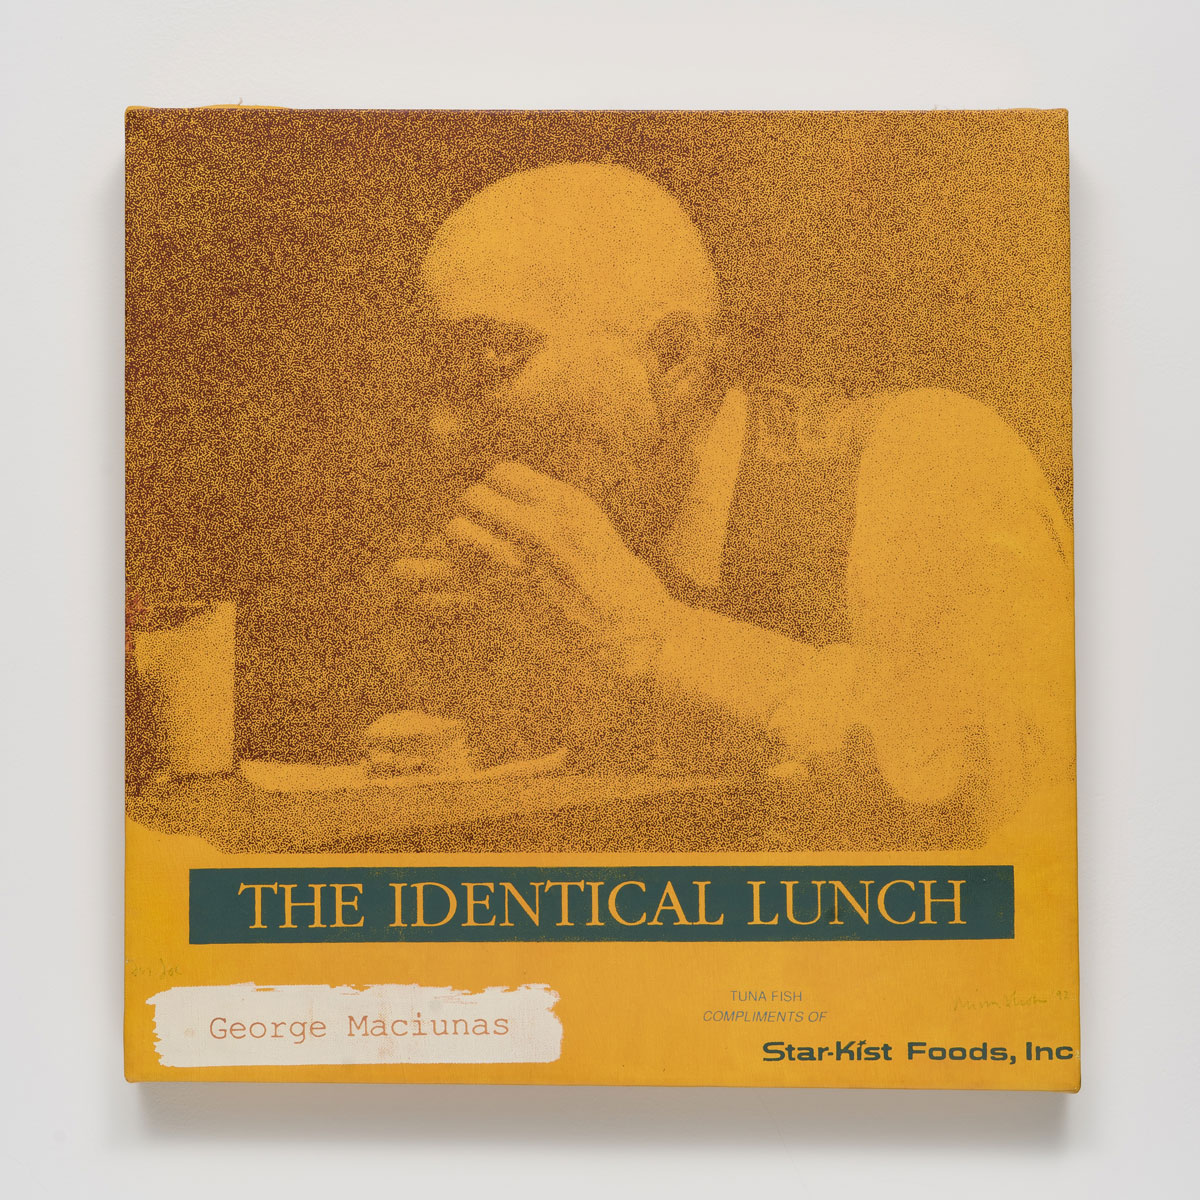 Brown on yellow print of man eating sandwich with 'the identical lunch' printed in green below